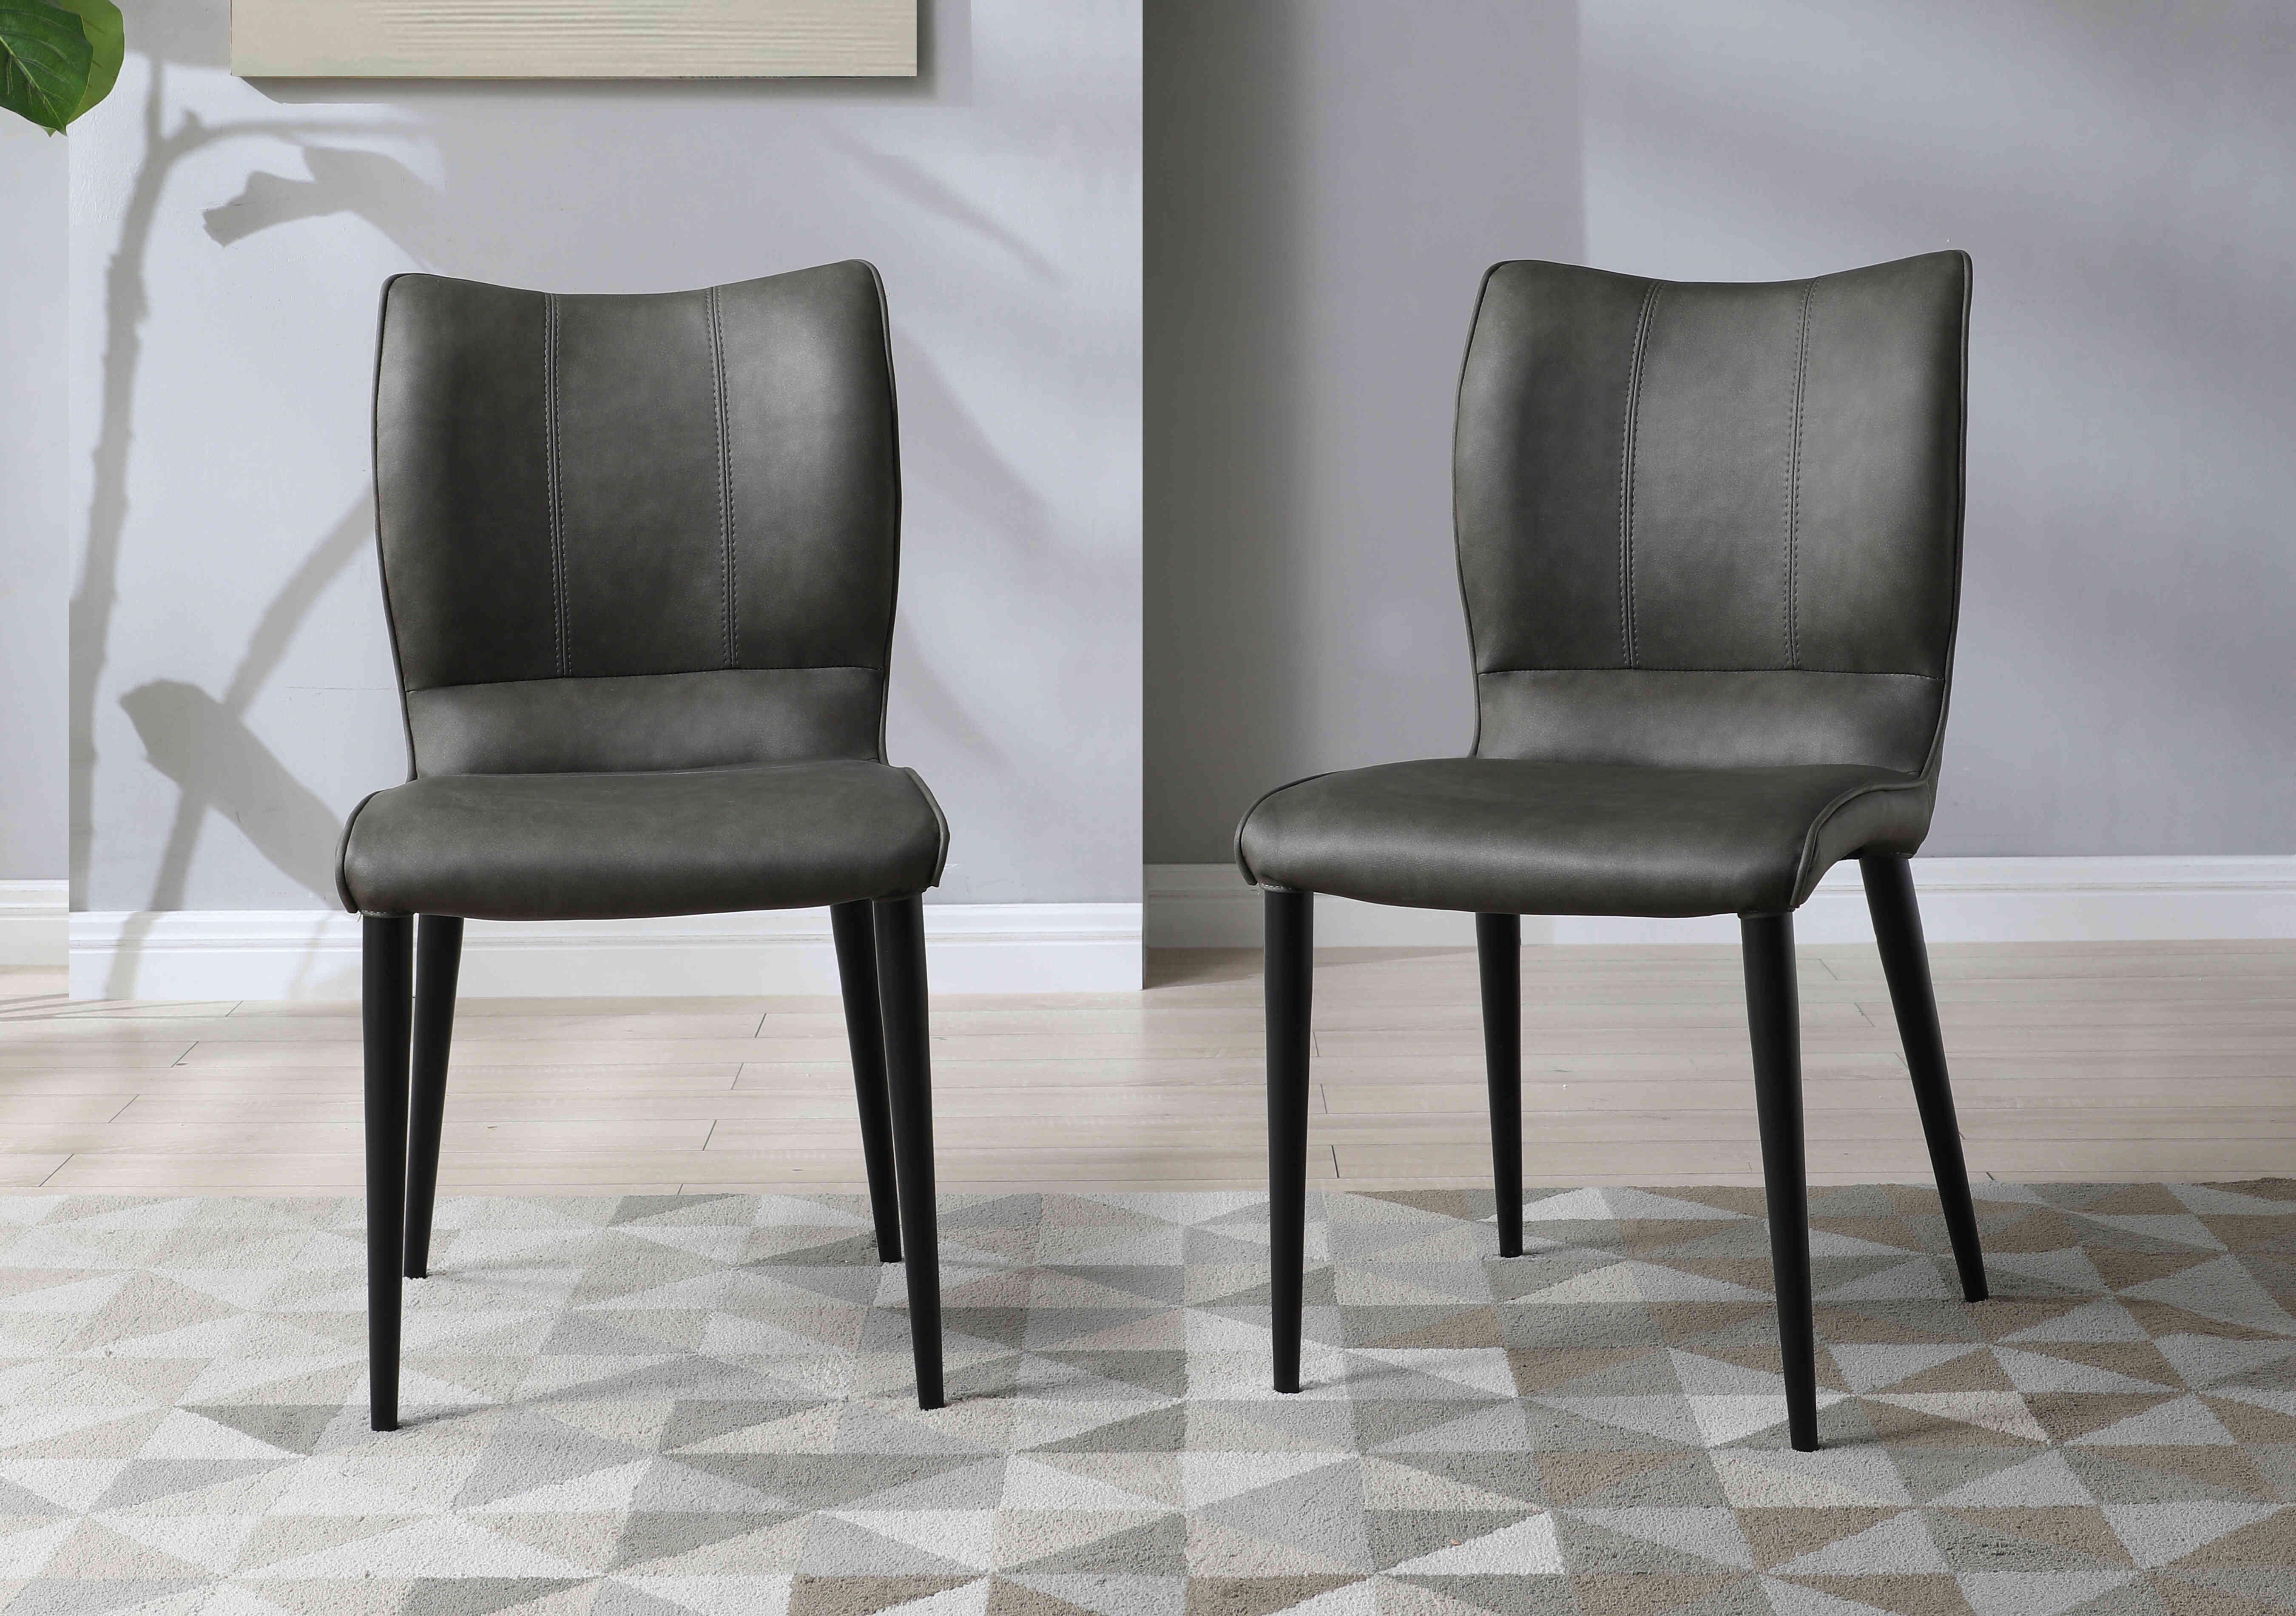 Murcia Set of 6 Dining Chairs in  on Furniture Village